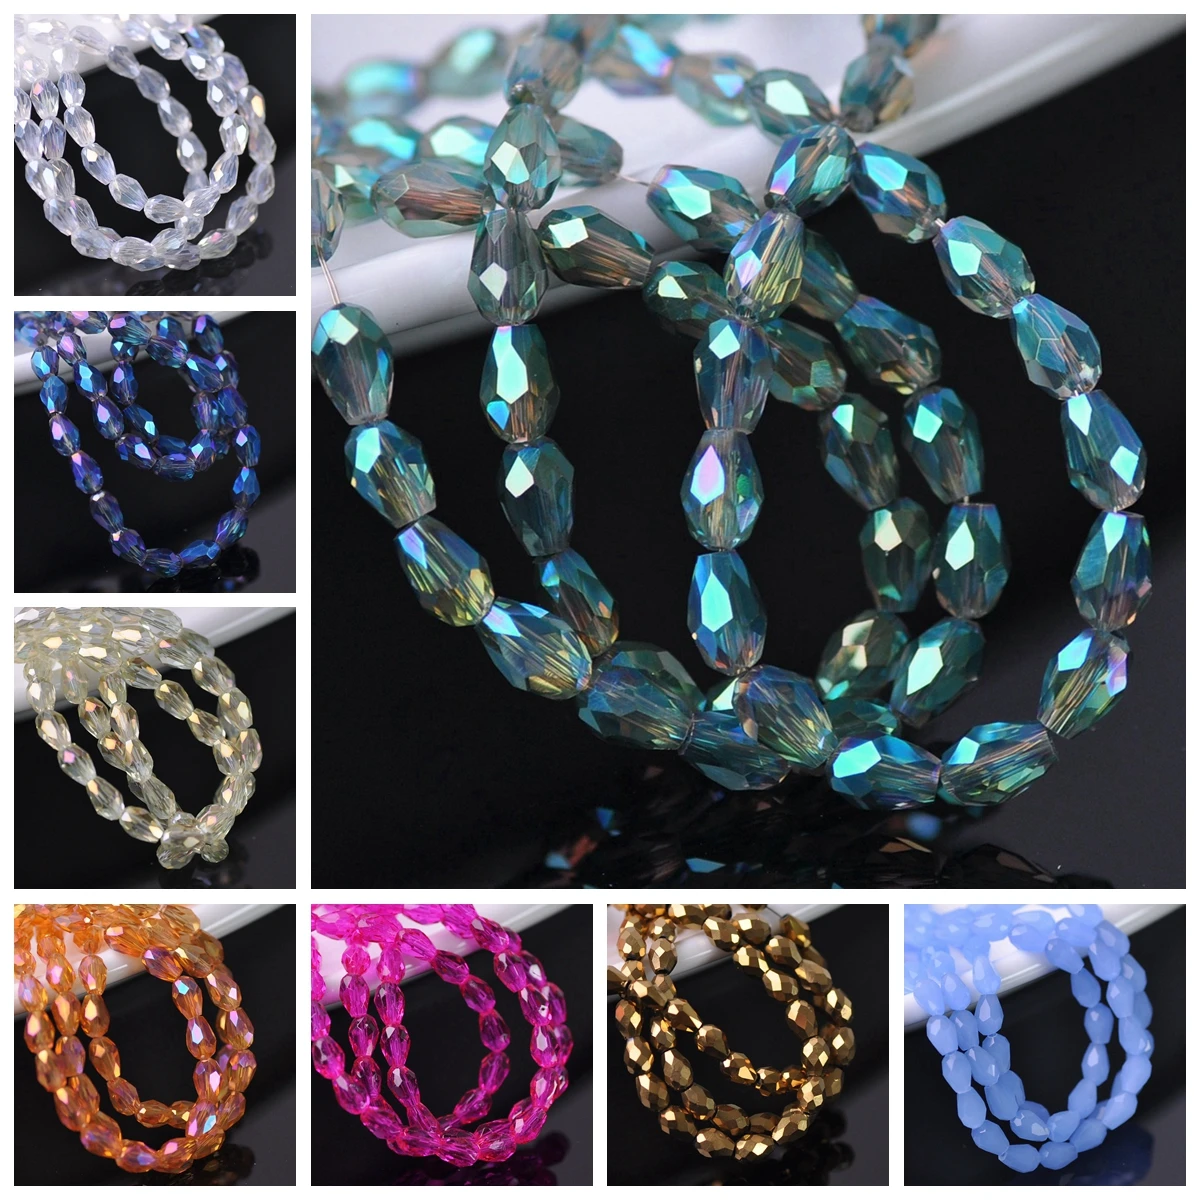 50pcs Small Teardrop Shape 6x4mm Faceted Crystal Glass Loose Spacer Beads Lot For Jewelry Making DIY Crafts Findings 30pcs 6mm diagonal hole cube faceted colorful crystal glass loose beads for jewelry making diy crafts findings